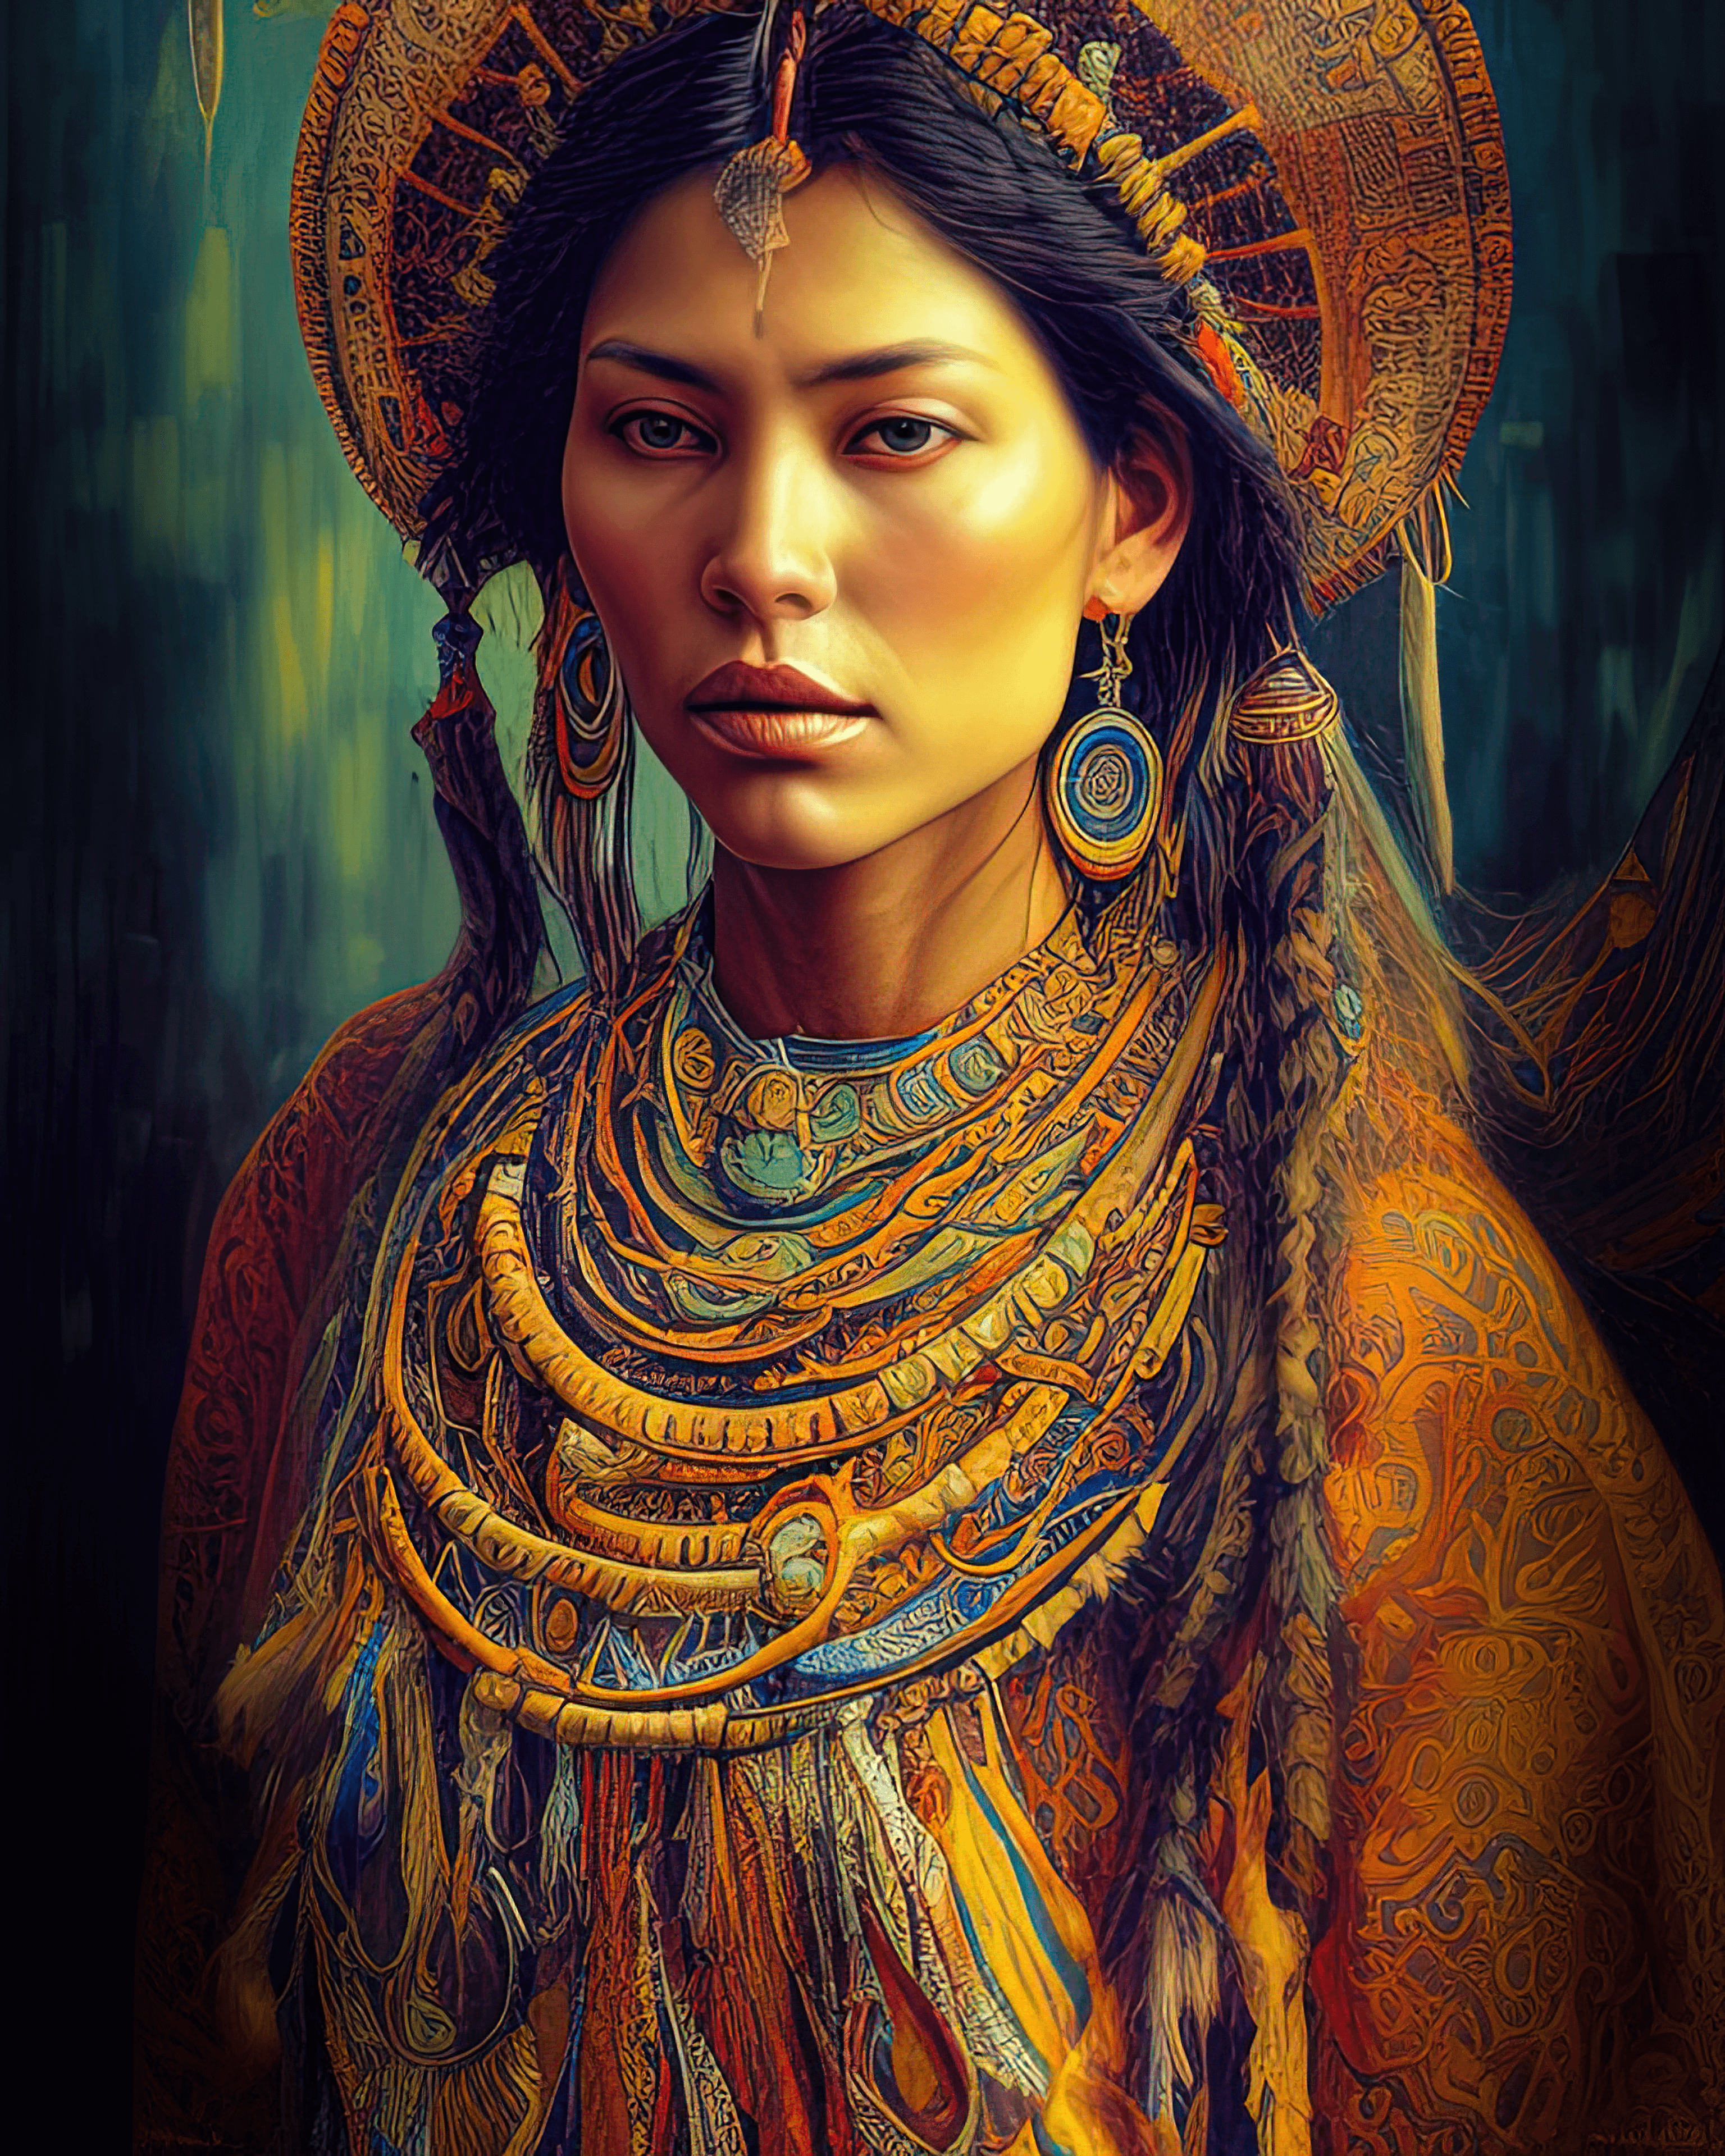 Young Shaman Woman - Altered Perception 05